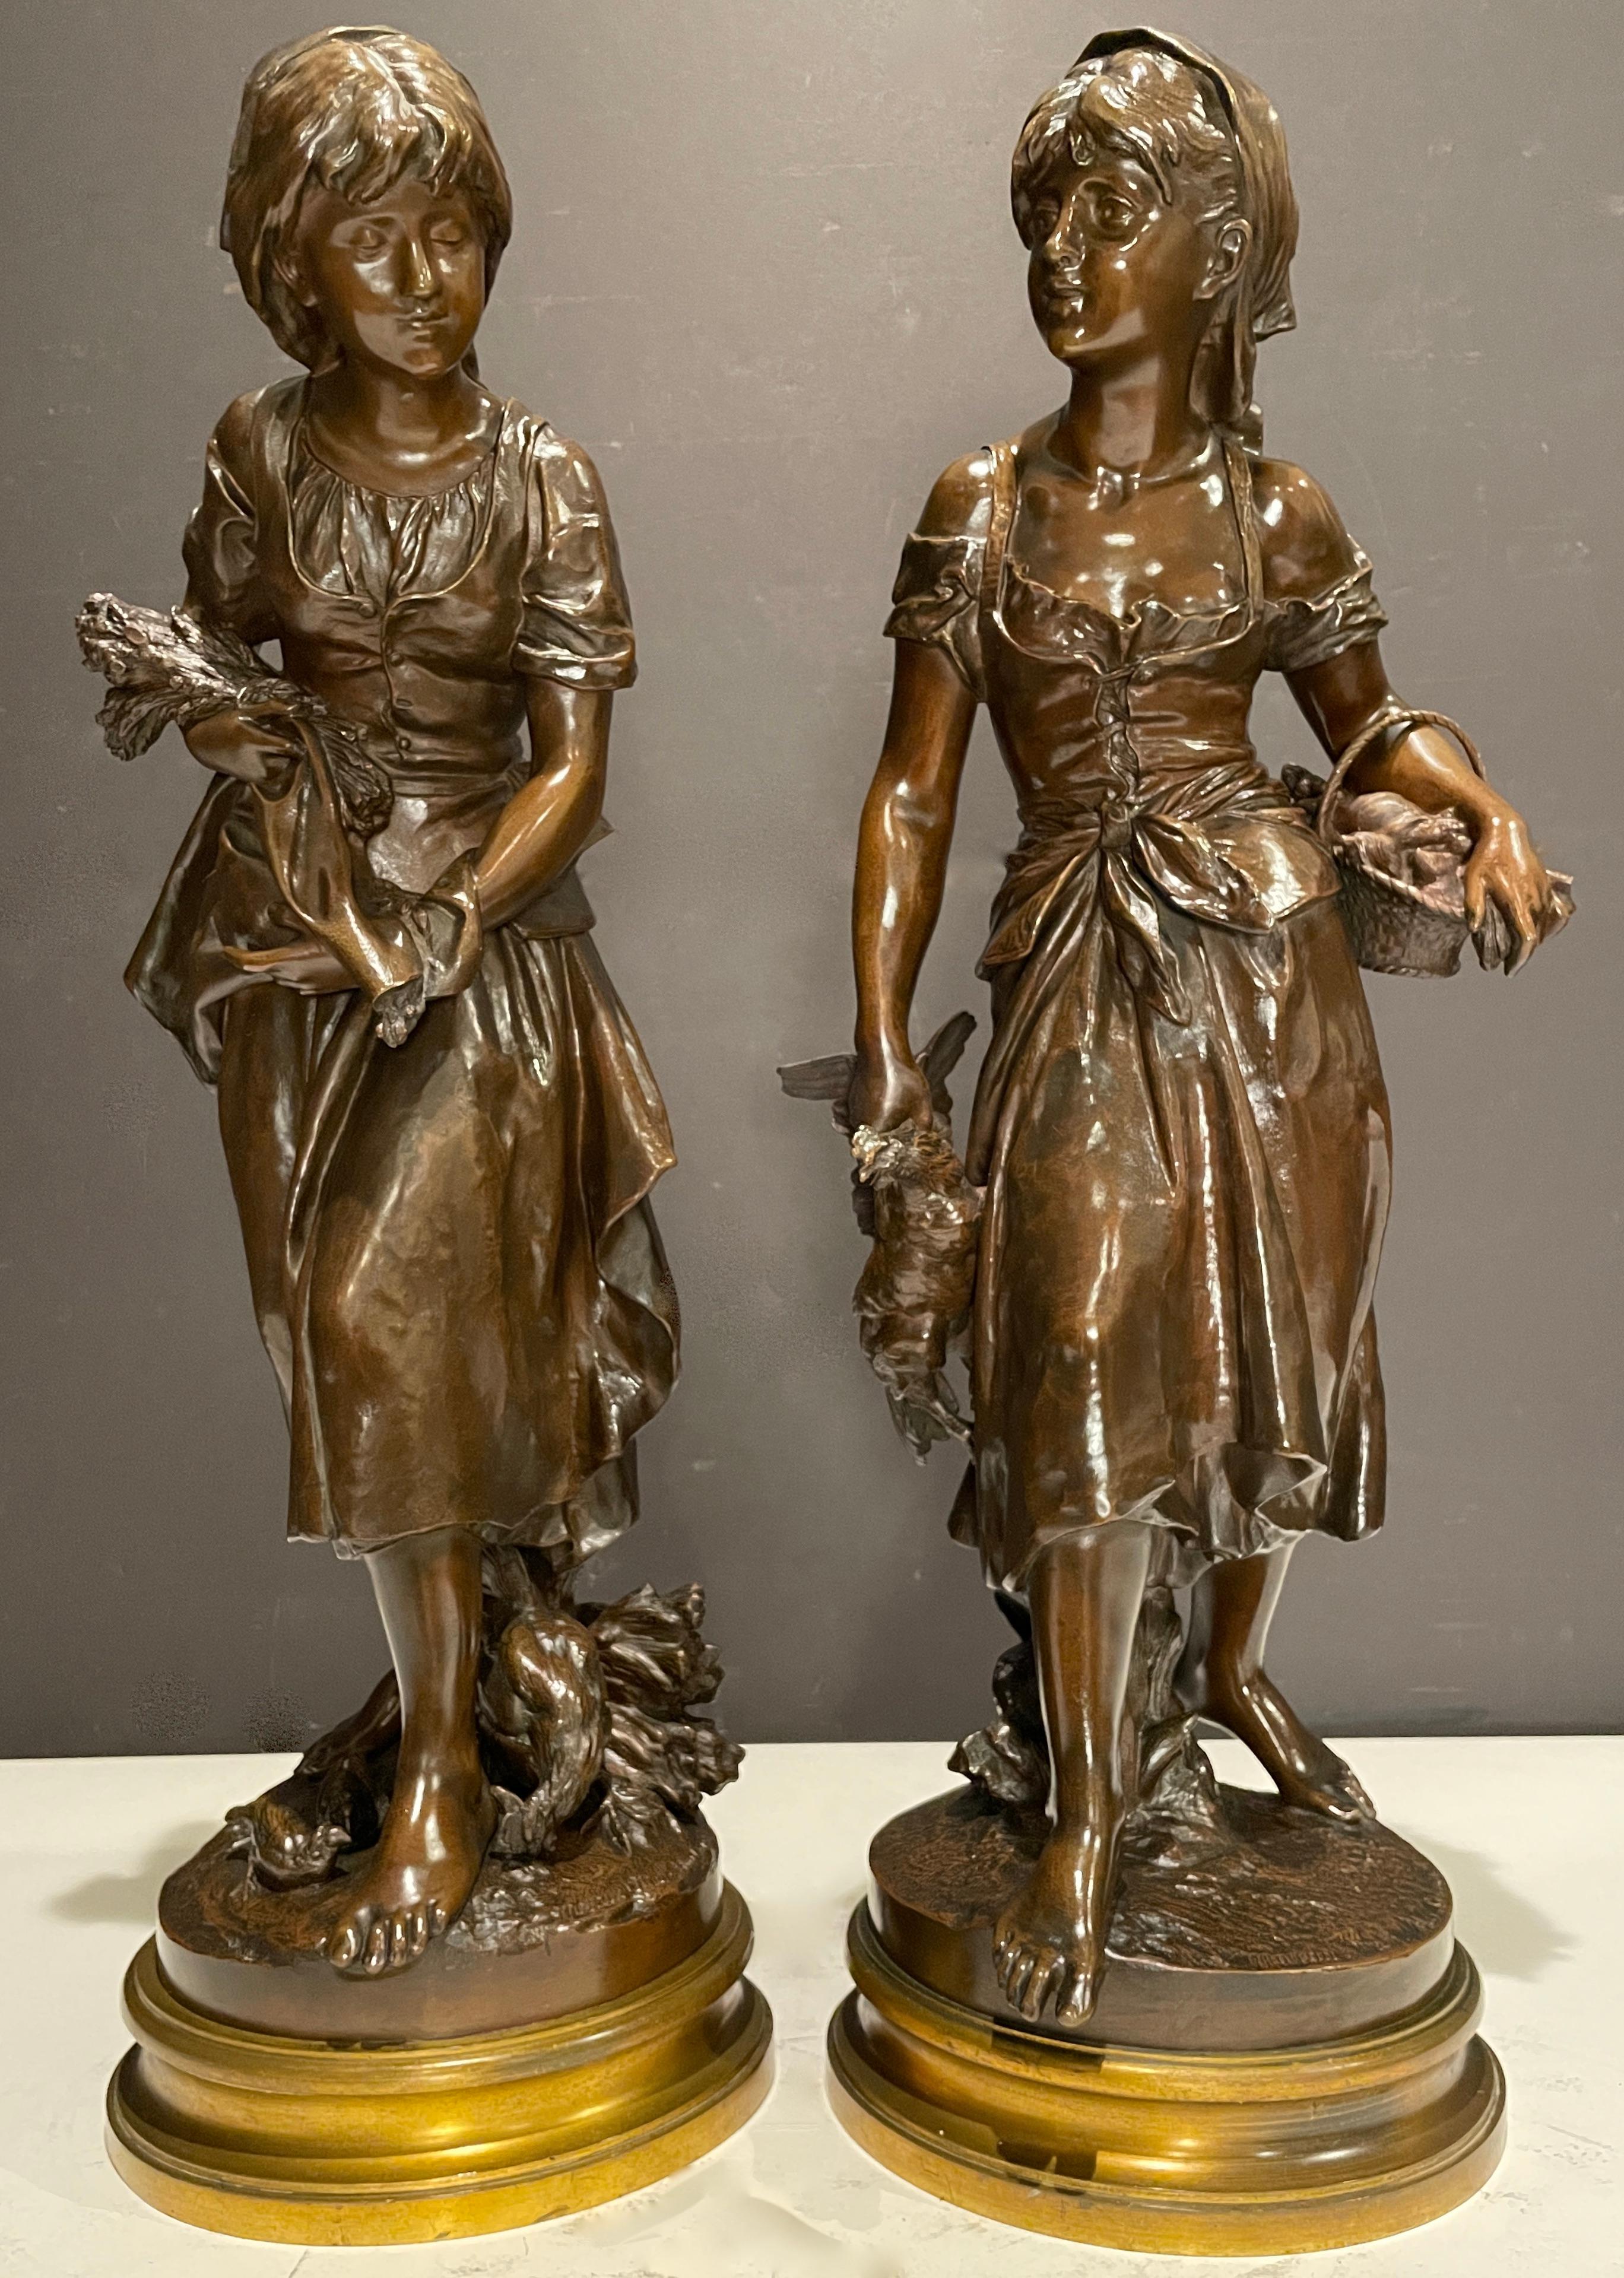 Mathurin Moreau (1822 - 1912) France. Large pair of bronzes in opposition with rich brown patina. Original 19th century bronze sculptures of Two young girls in a field with chickens and baskets. Fine quality and beautiful image. Each signed at base,